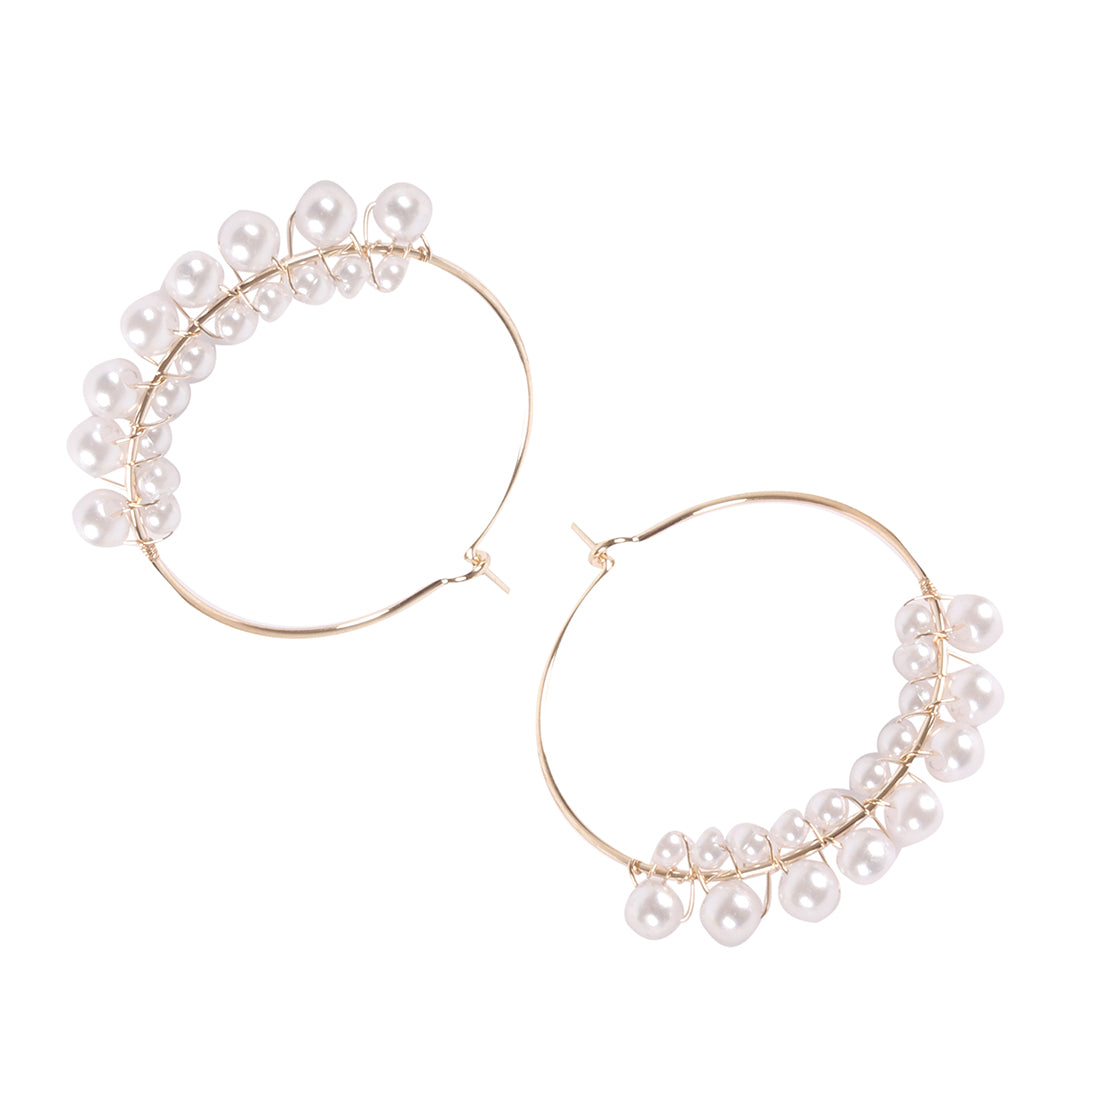 OVERSIZED PEARL STUDDED GOLD-TONED CIRCULAR HOOP EARRINGS